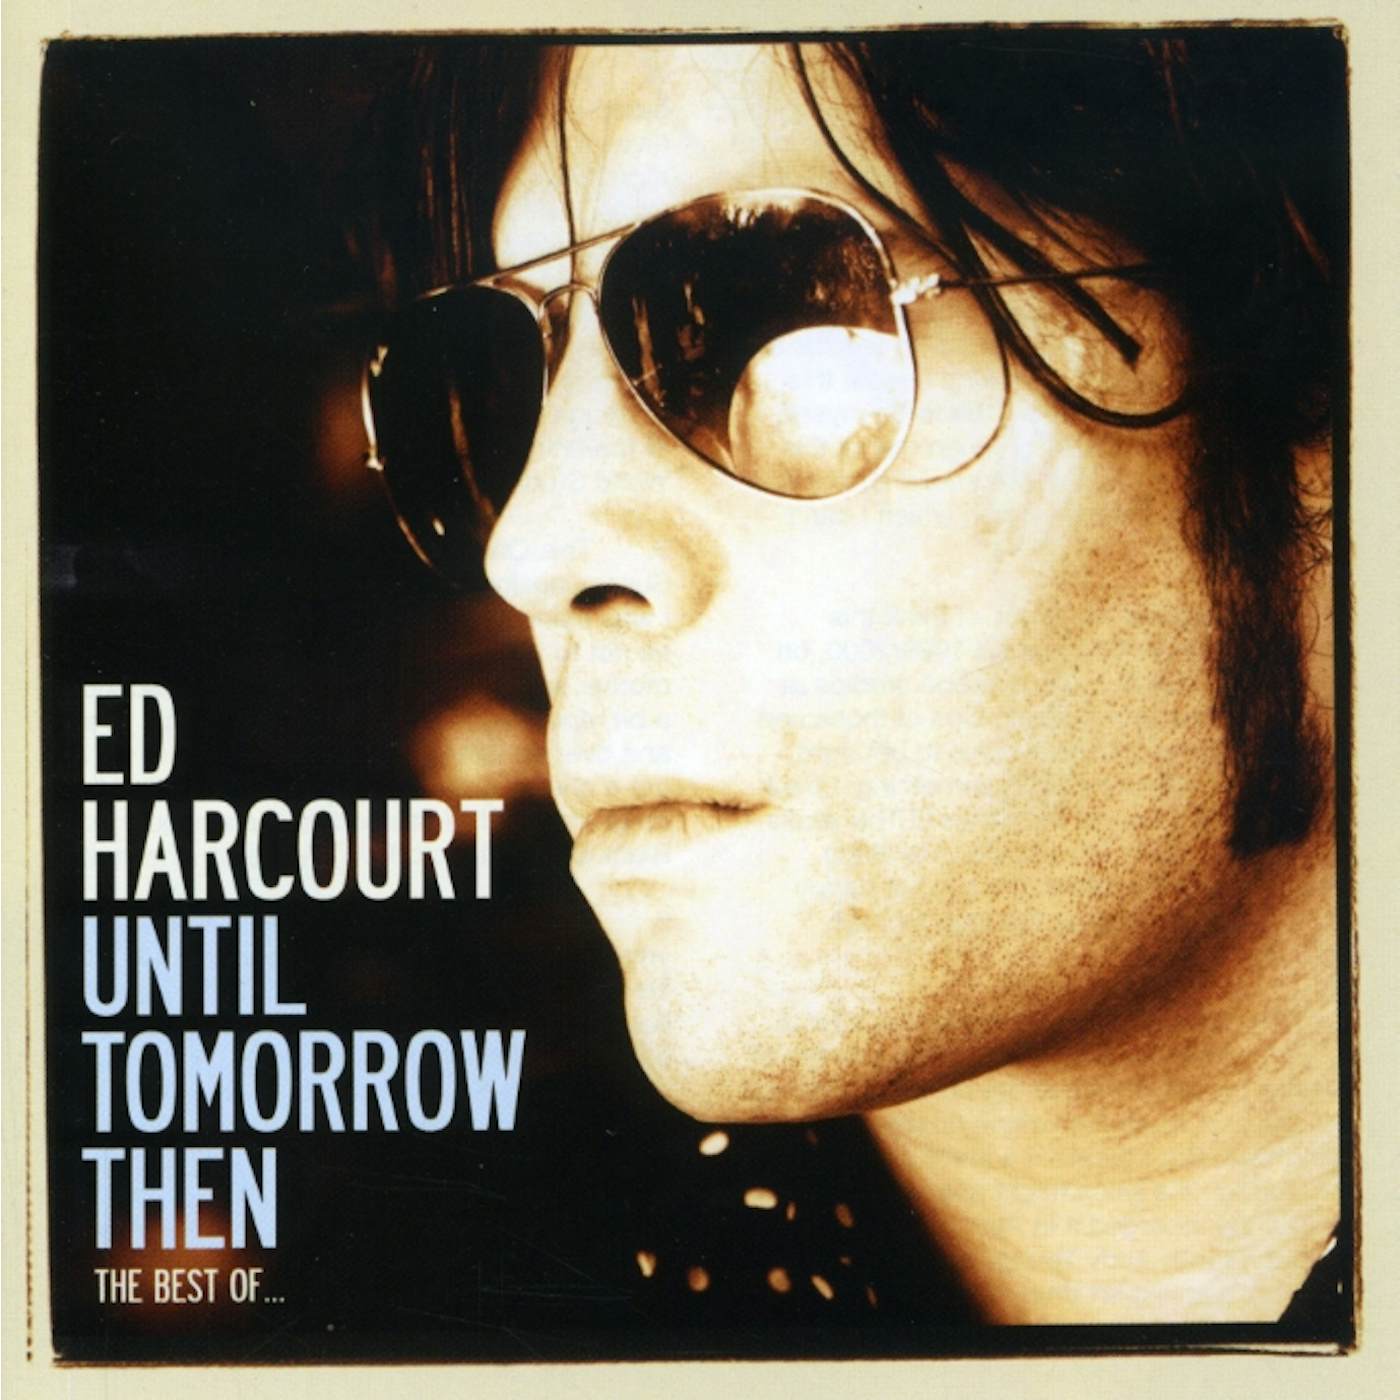 Ed Harcourt UNTIL TOMORROW THEN: THE BEST OF CD